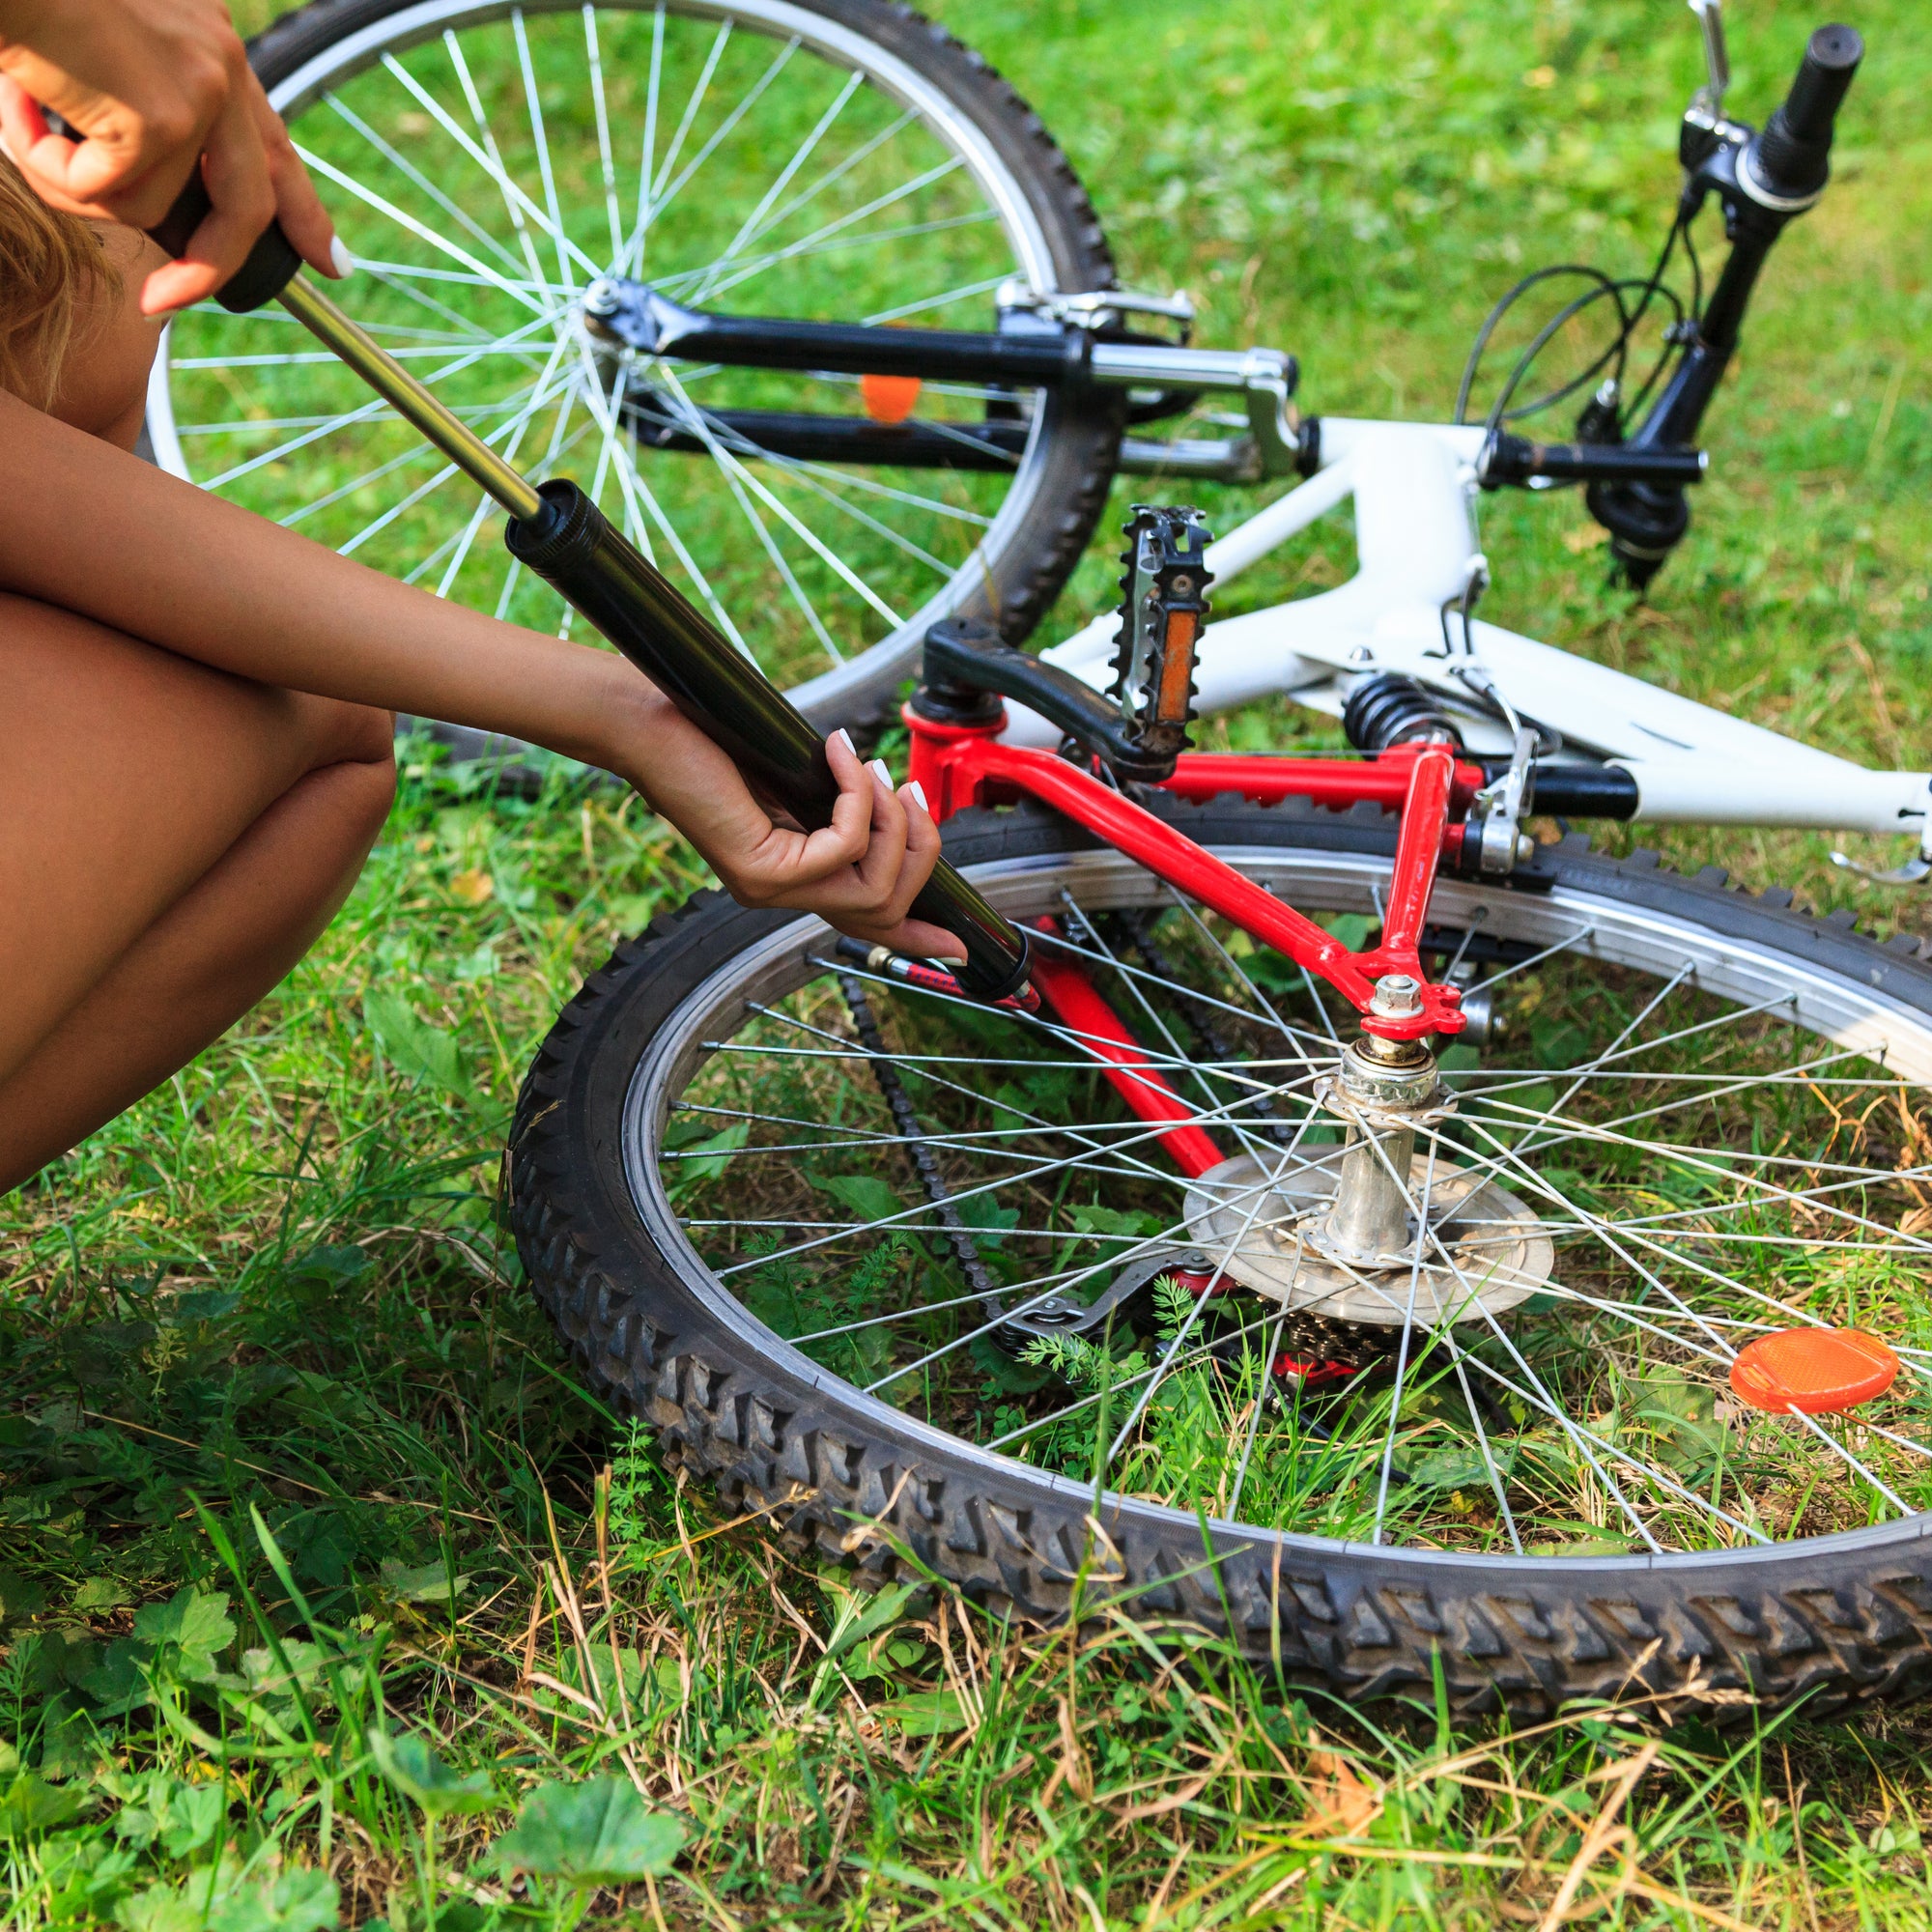 where to pump bicycle tires